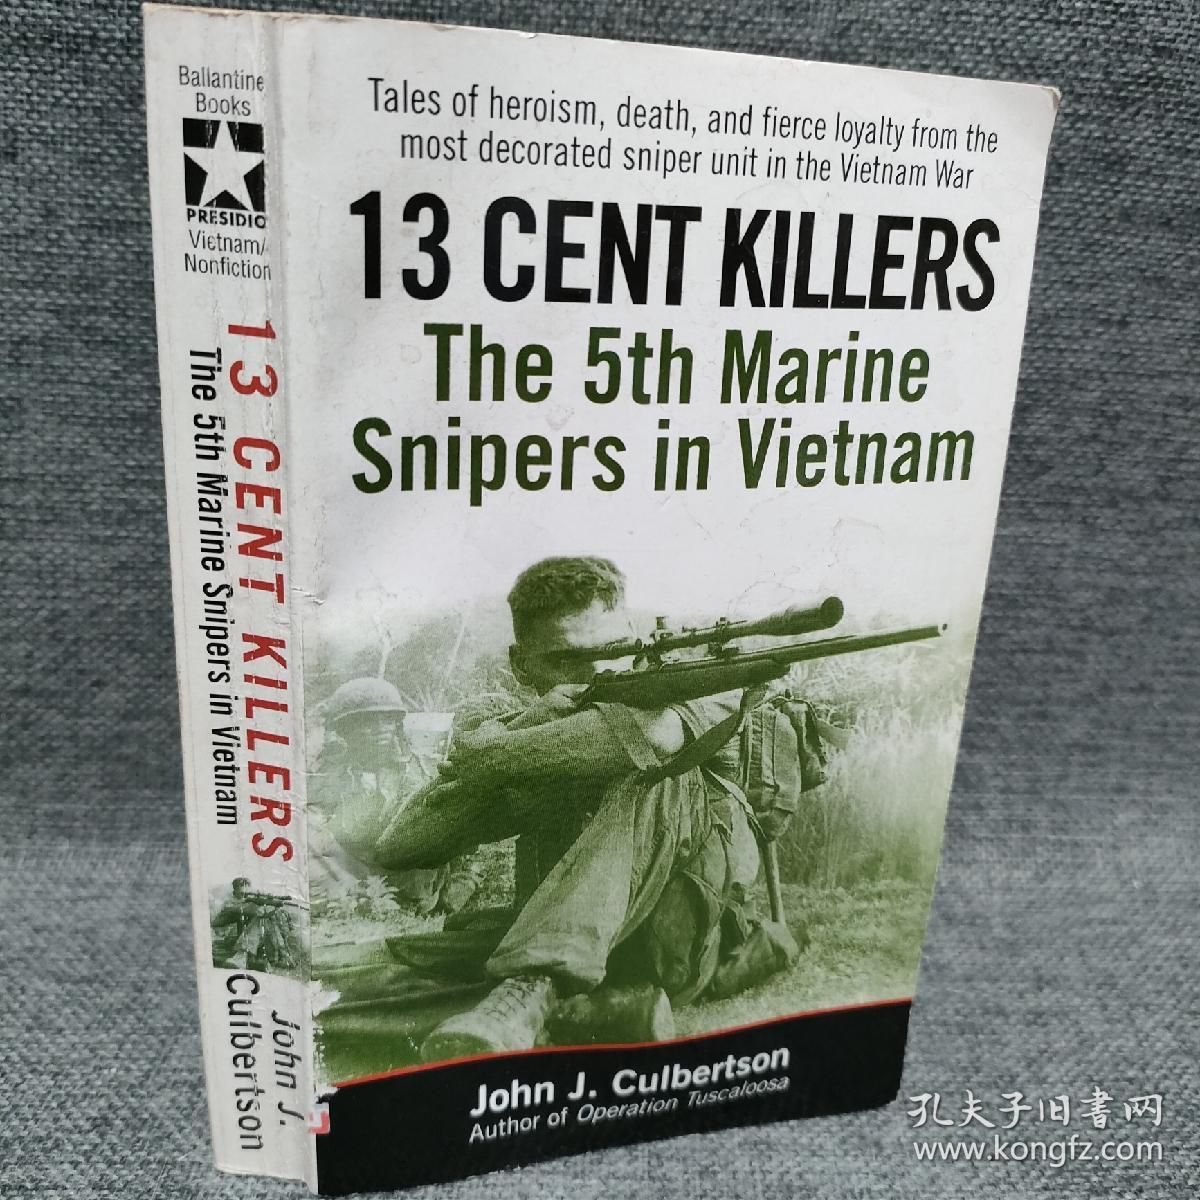 13 CENT KILLERS The 5th Marine Snipers in Vietnam